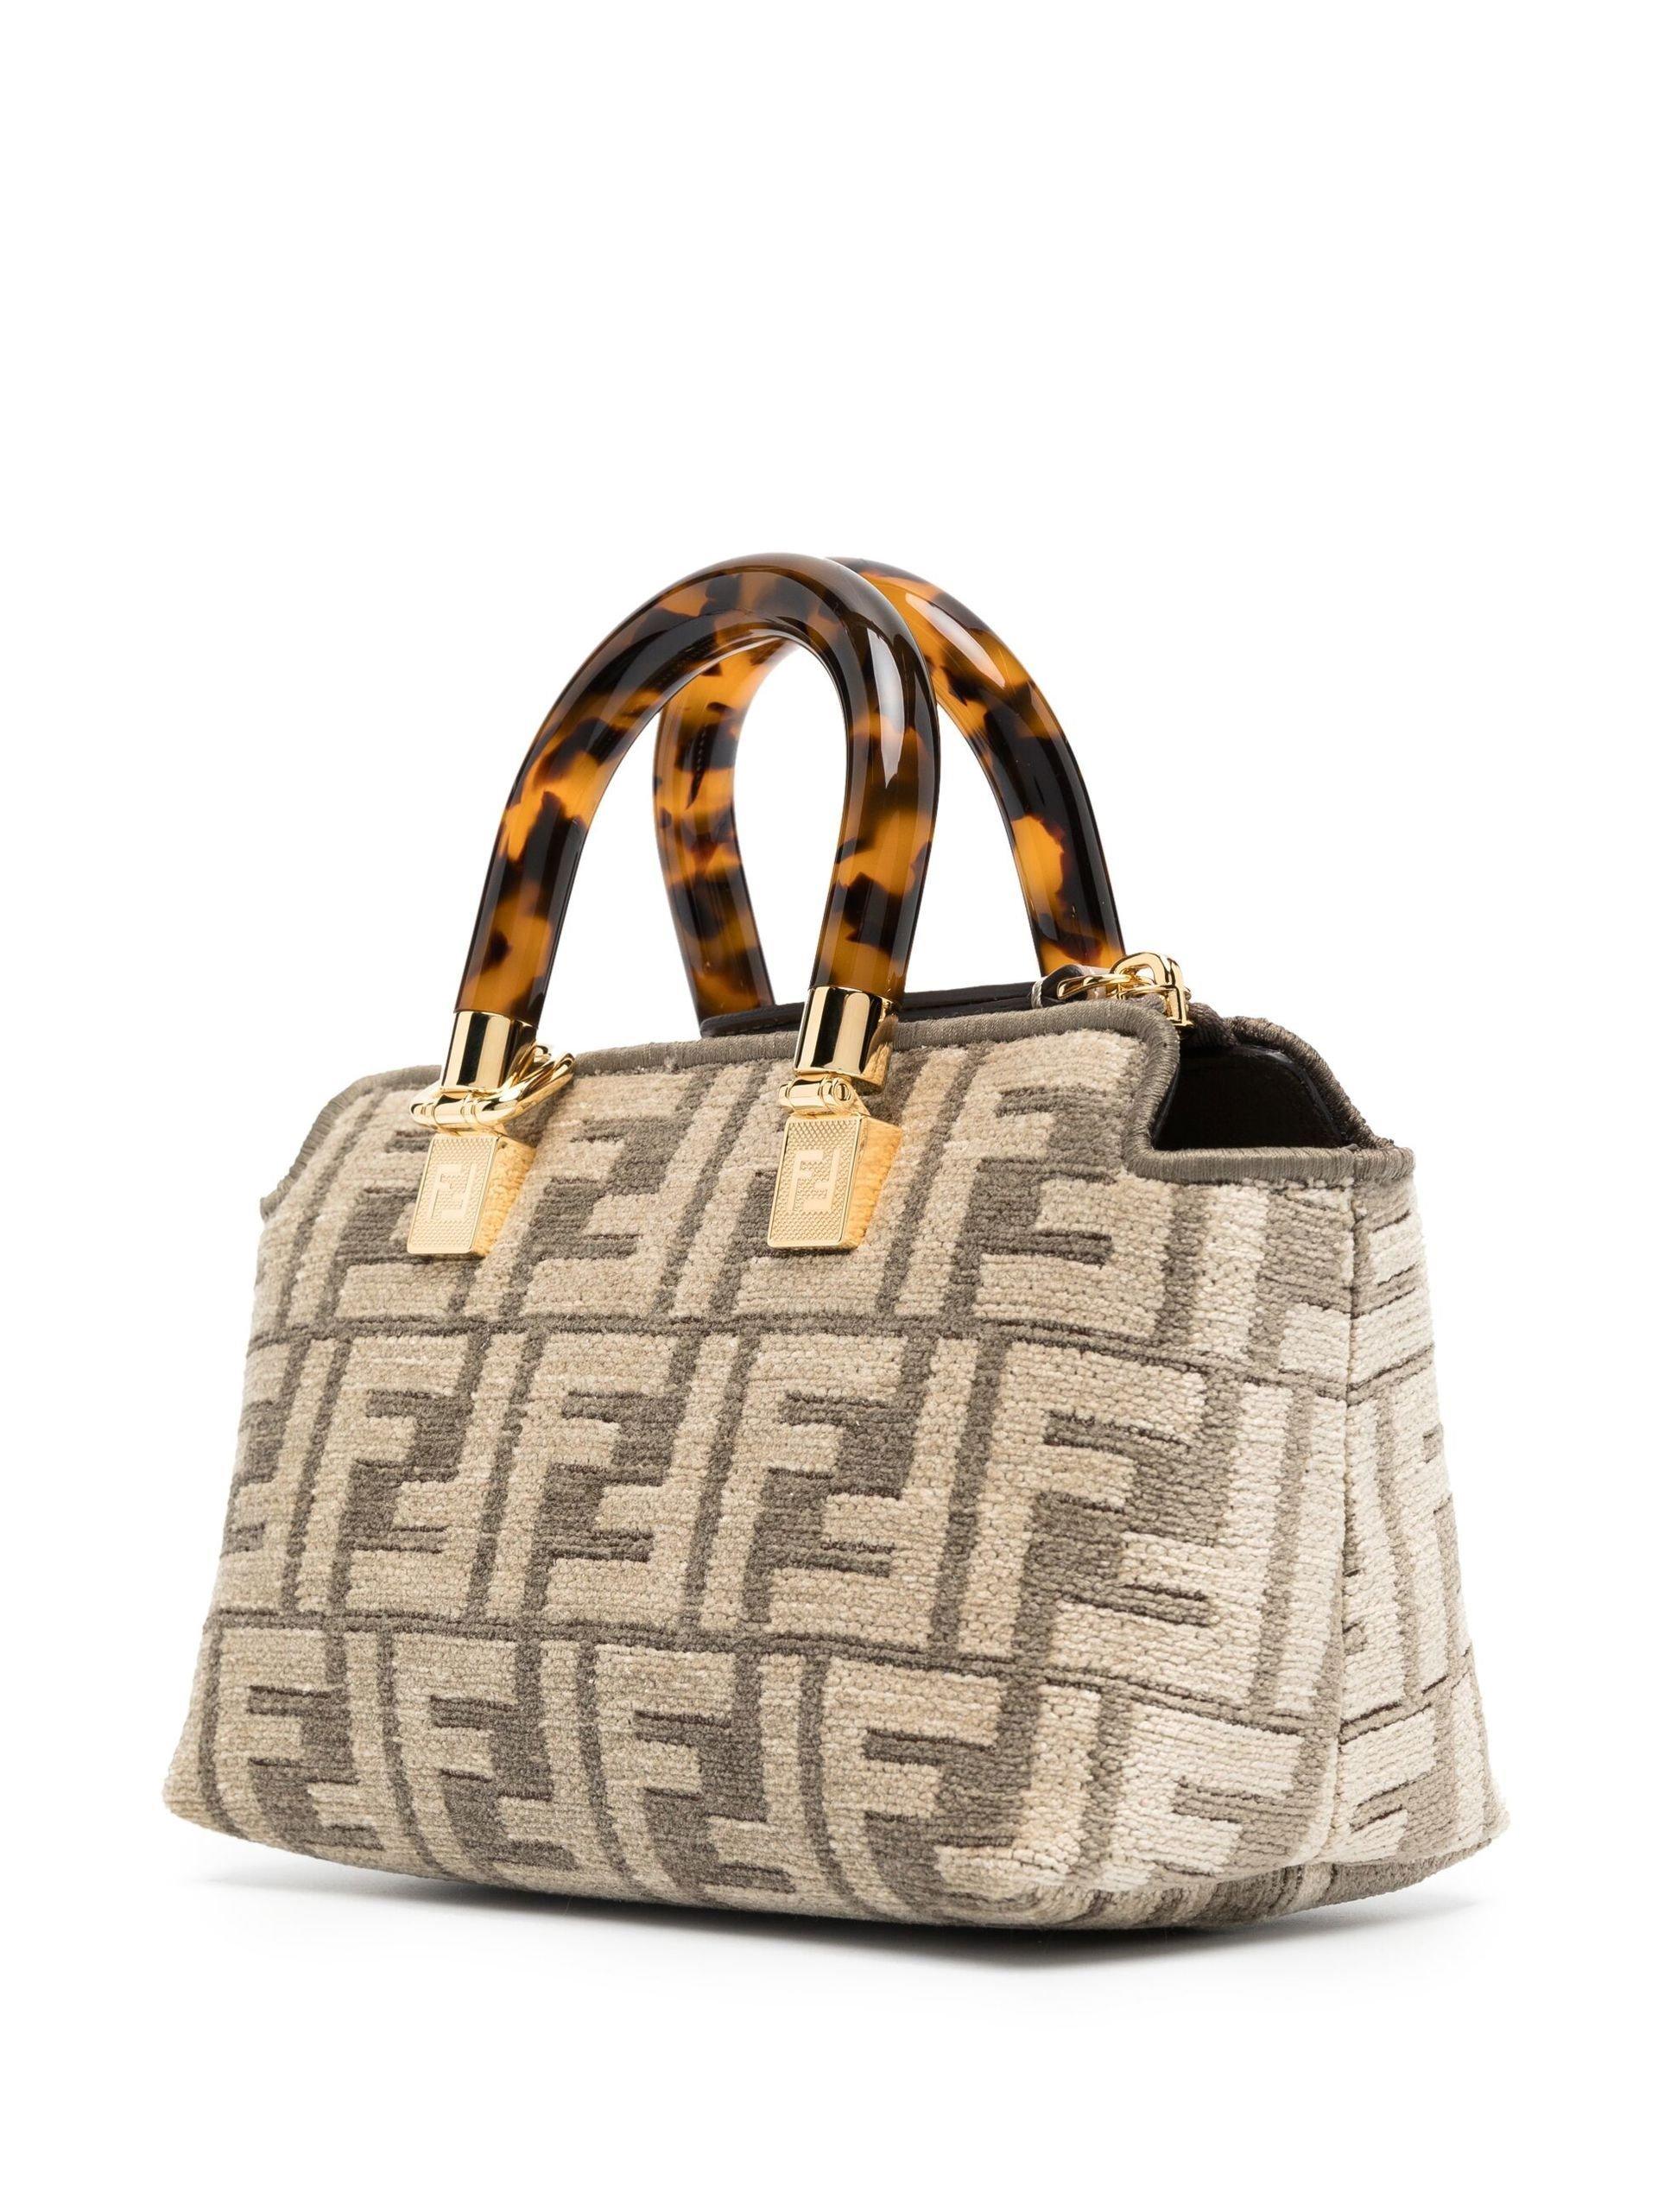 Fendi Mini By The Way Boston Bag In FF Tapestry Fabric Brown